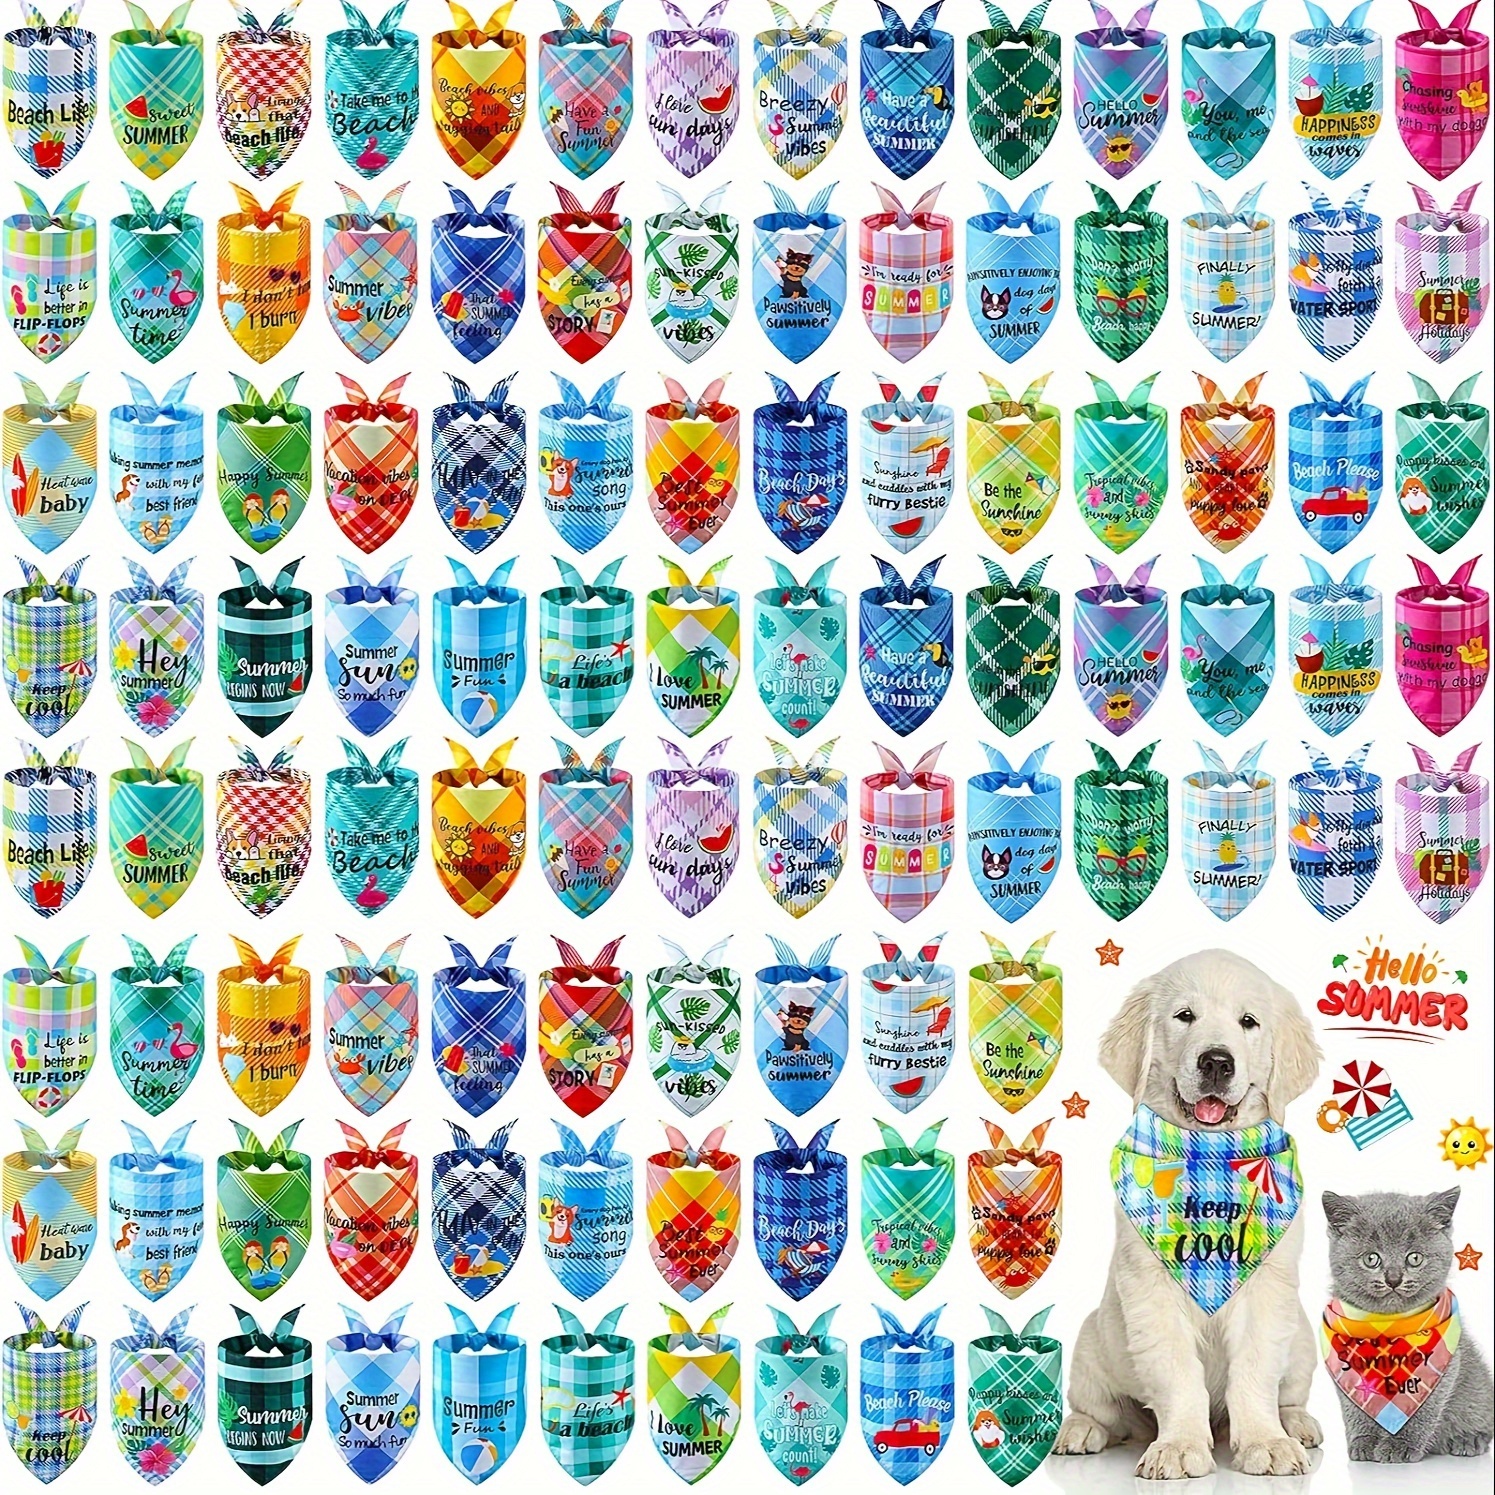 

30pcs Assorted Summer Plaid And Solid Color Dog Bandanas, Polyester Pet Scarves, Breathable, No Seam Design, 1 Size Fits Most, Fashionable Pet Accessories For Dogs & Cats